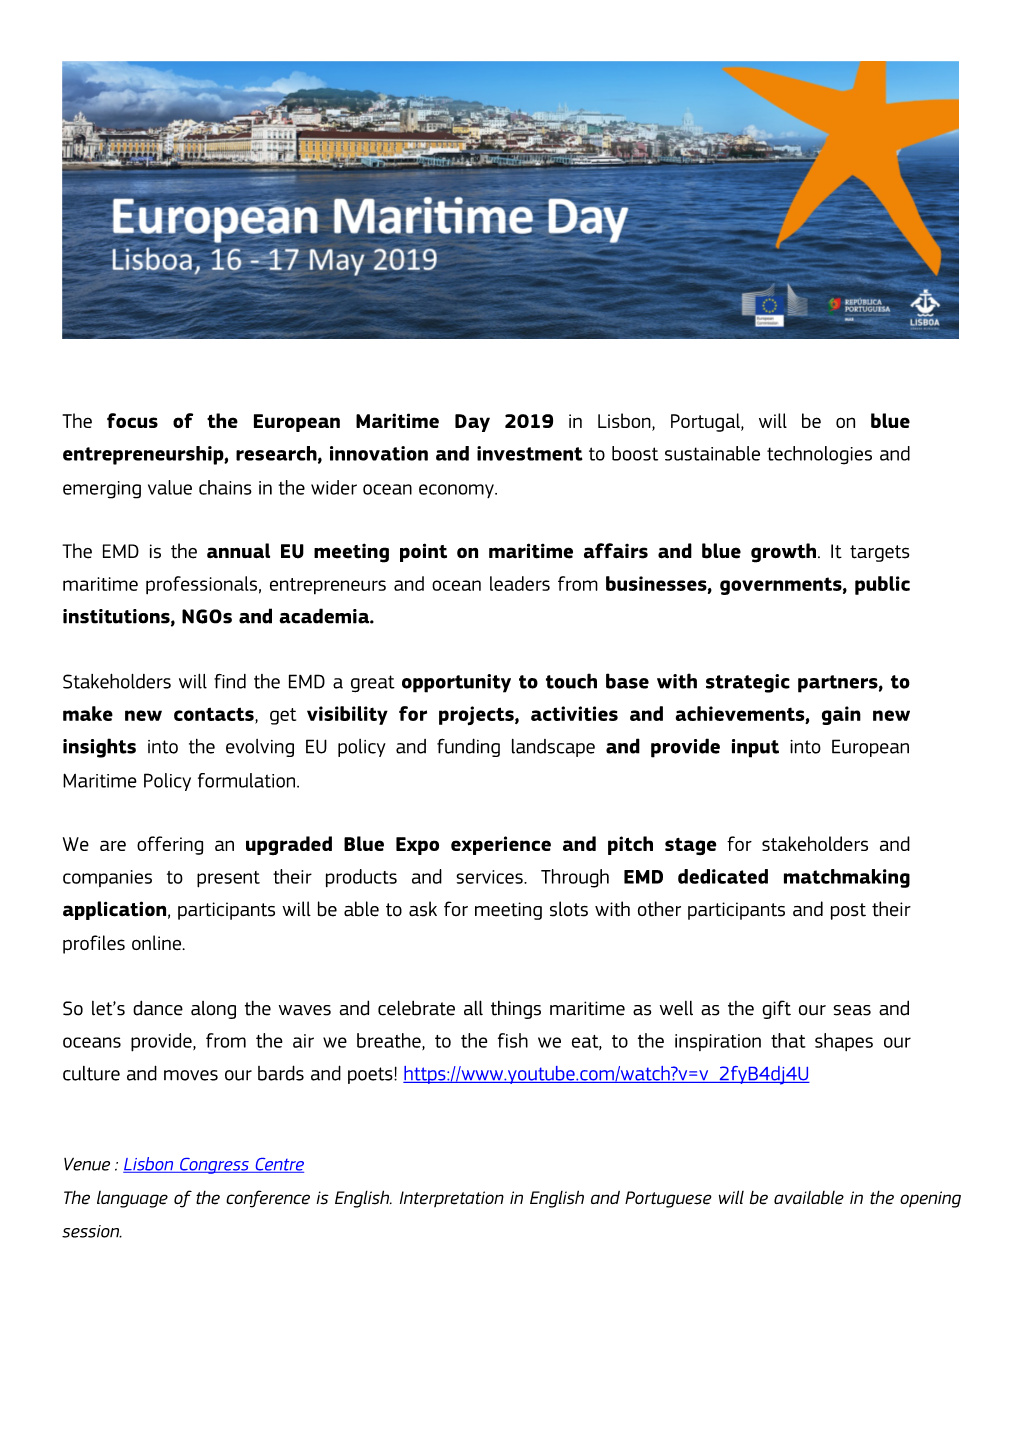 The Focus of the European Maritime Day 2019 in Lisbon, Portugal, Will Be on Blue Entrepreneurship, Research, Innovation and Inve